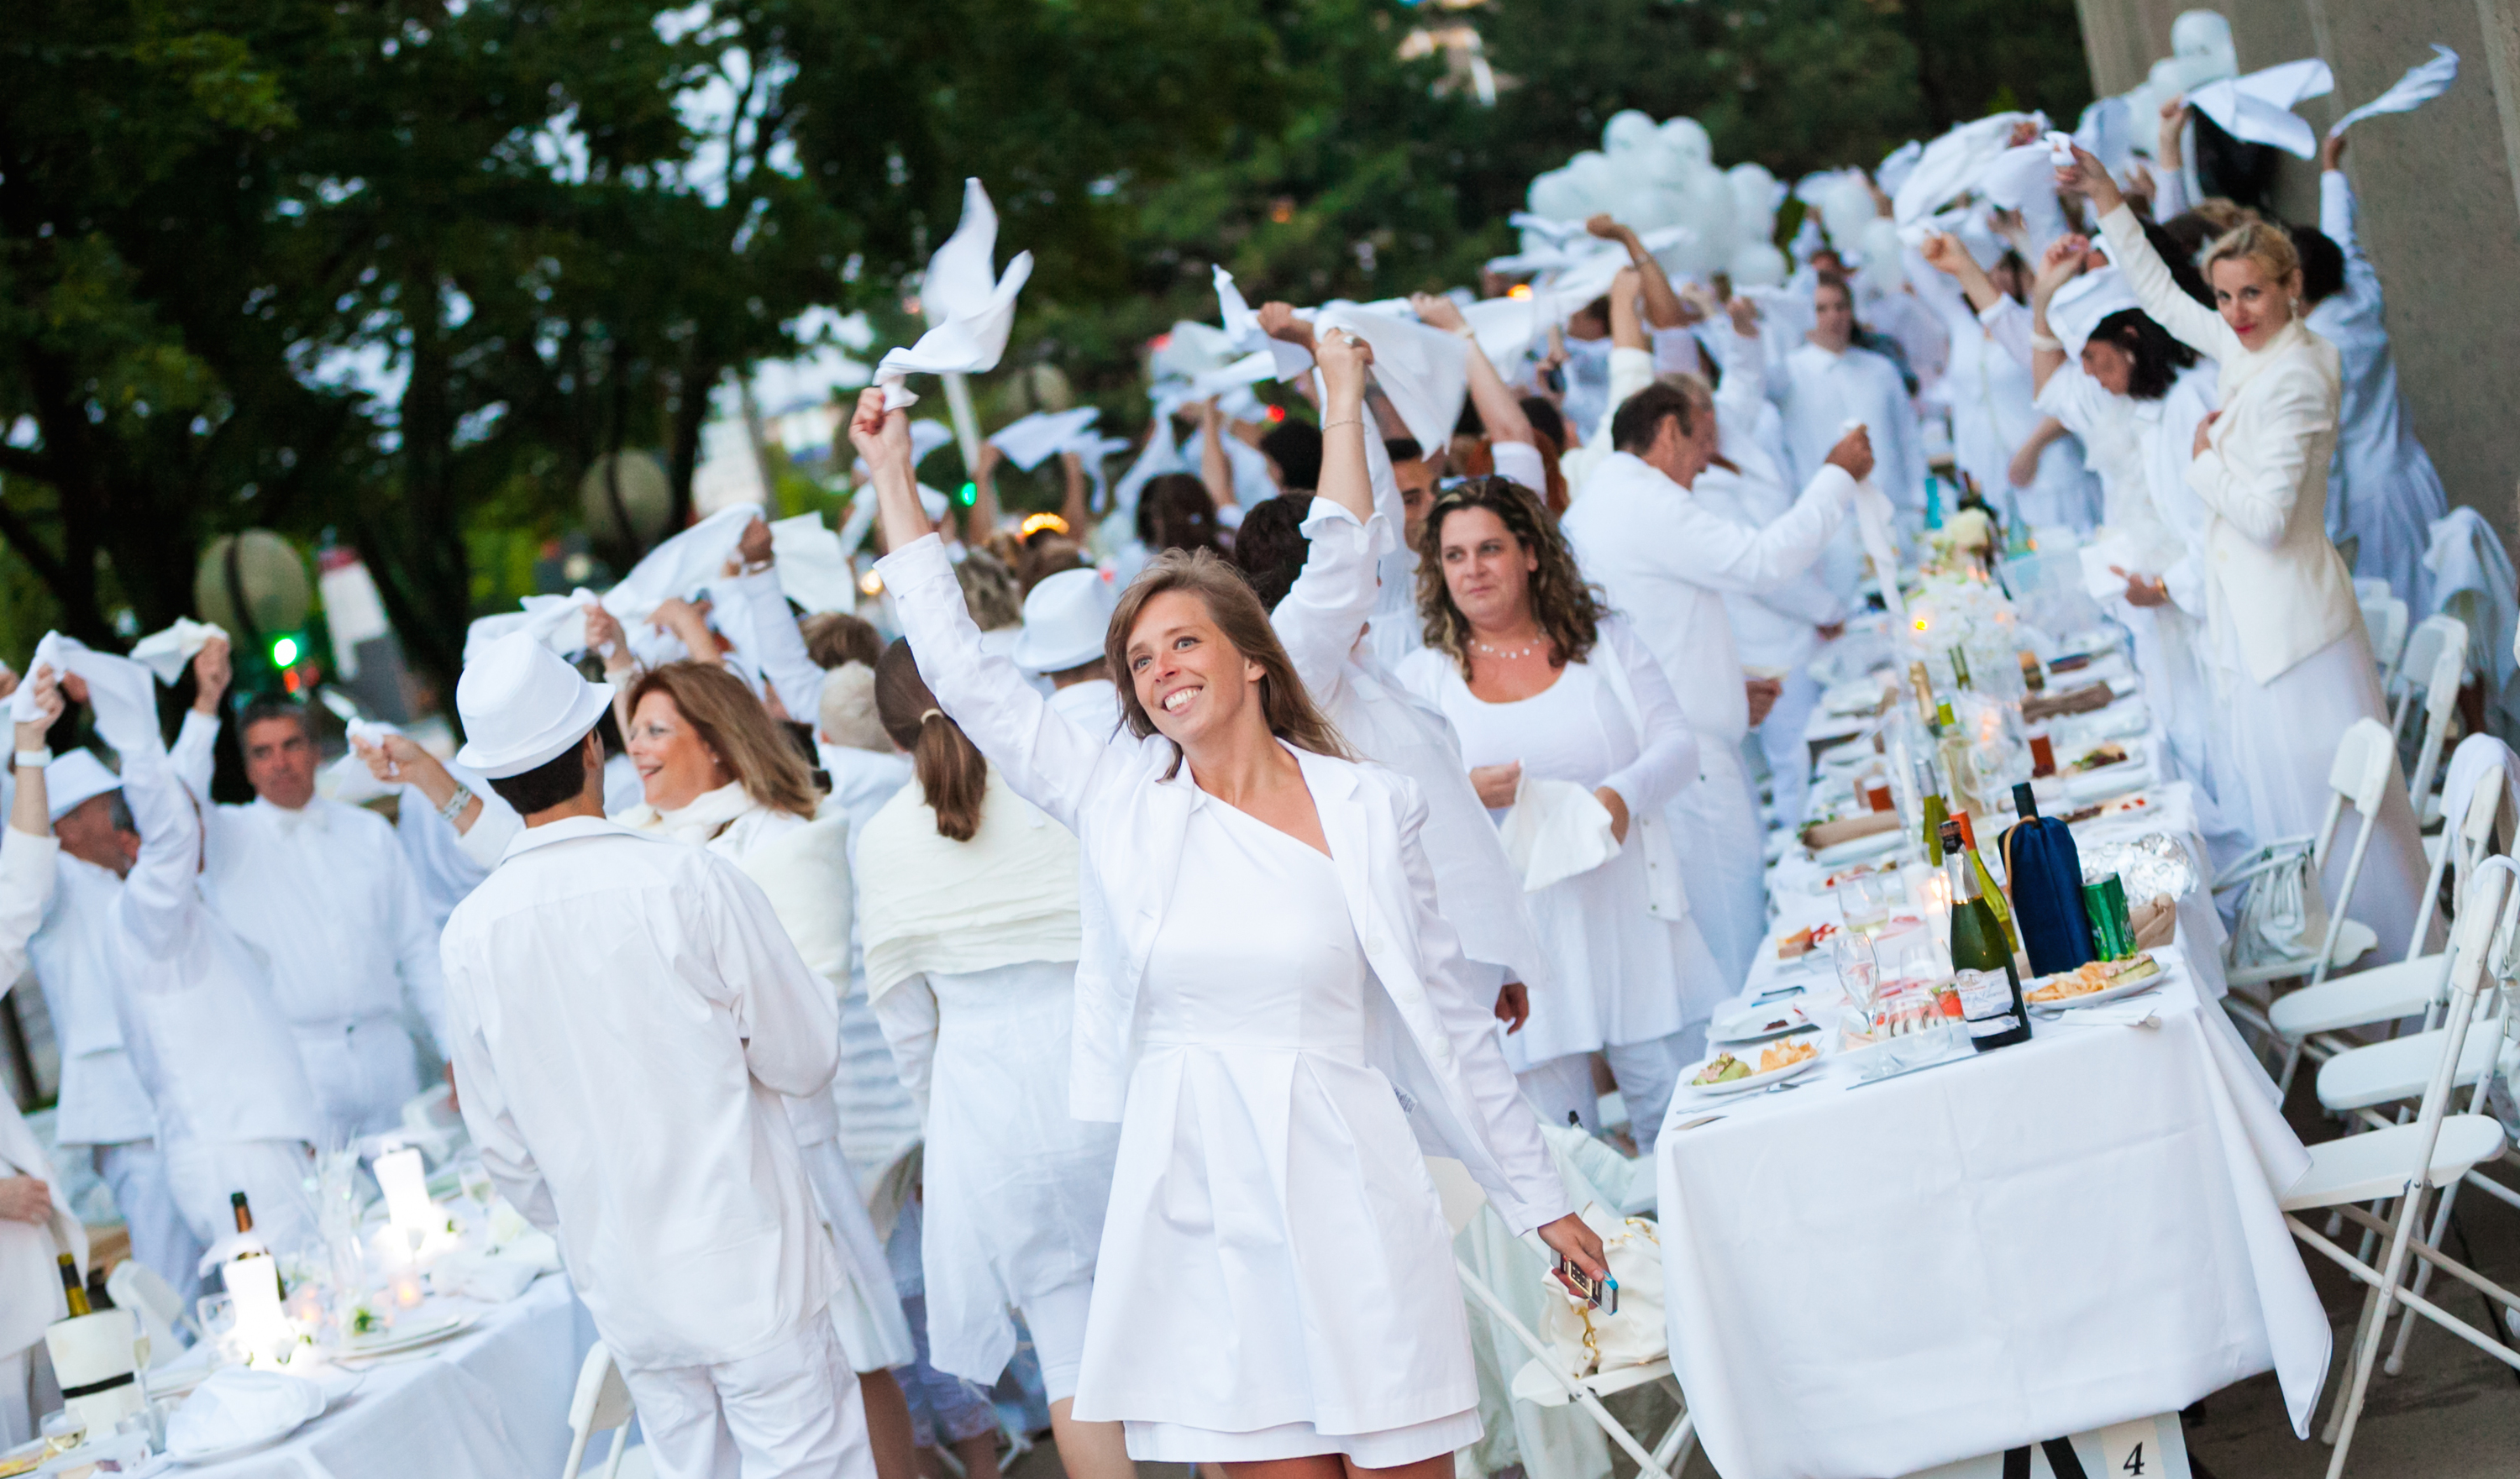 Dîner en Blanc NYC guide including how to join the secret party